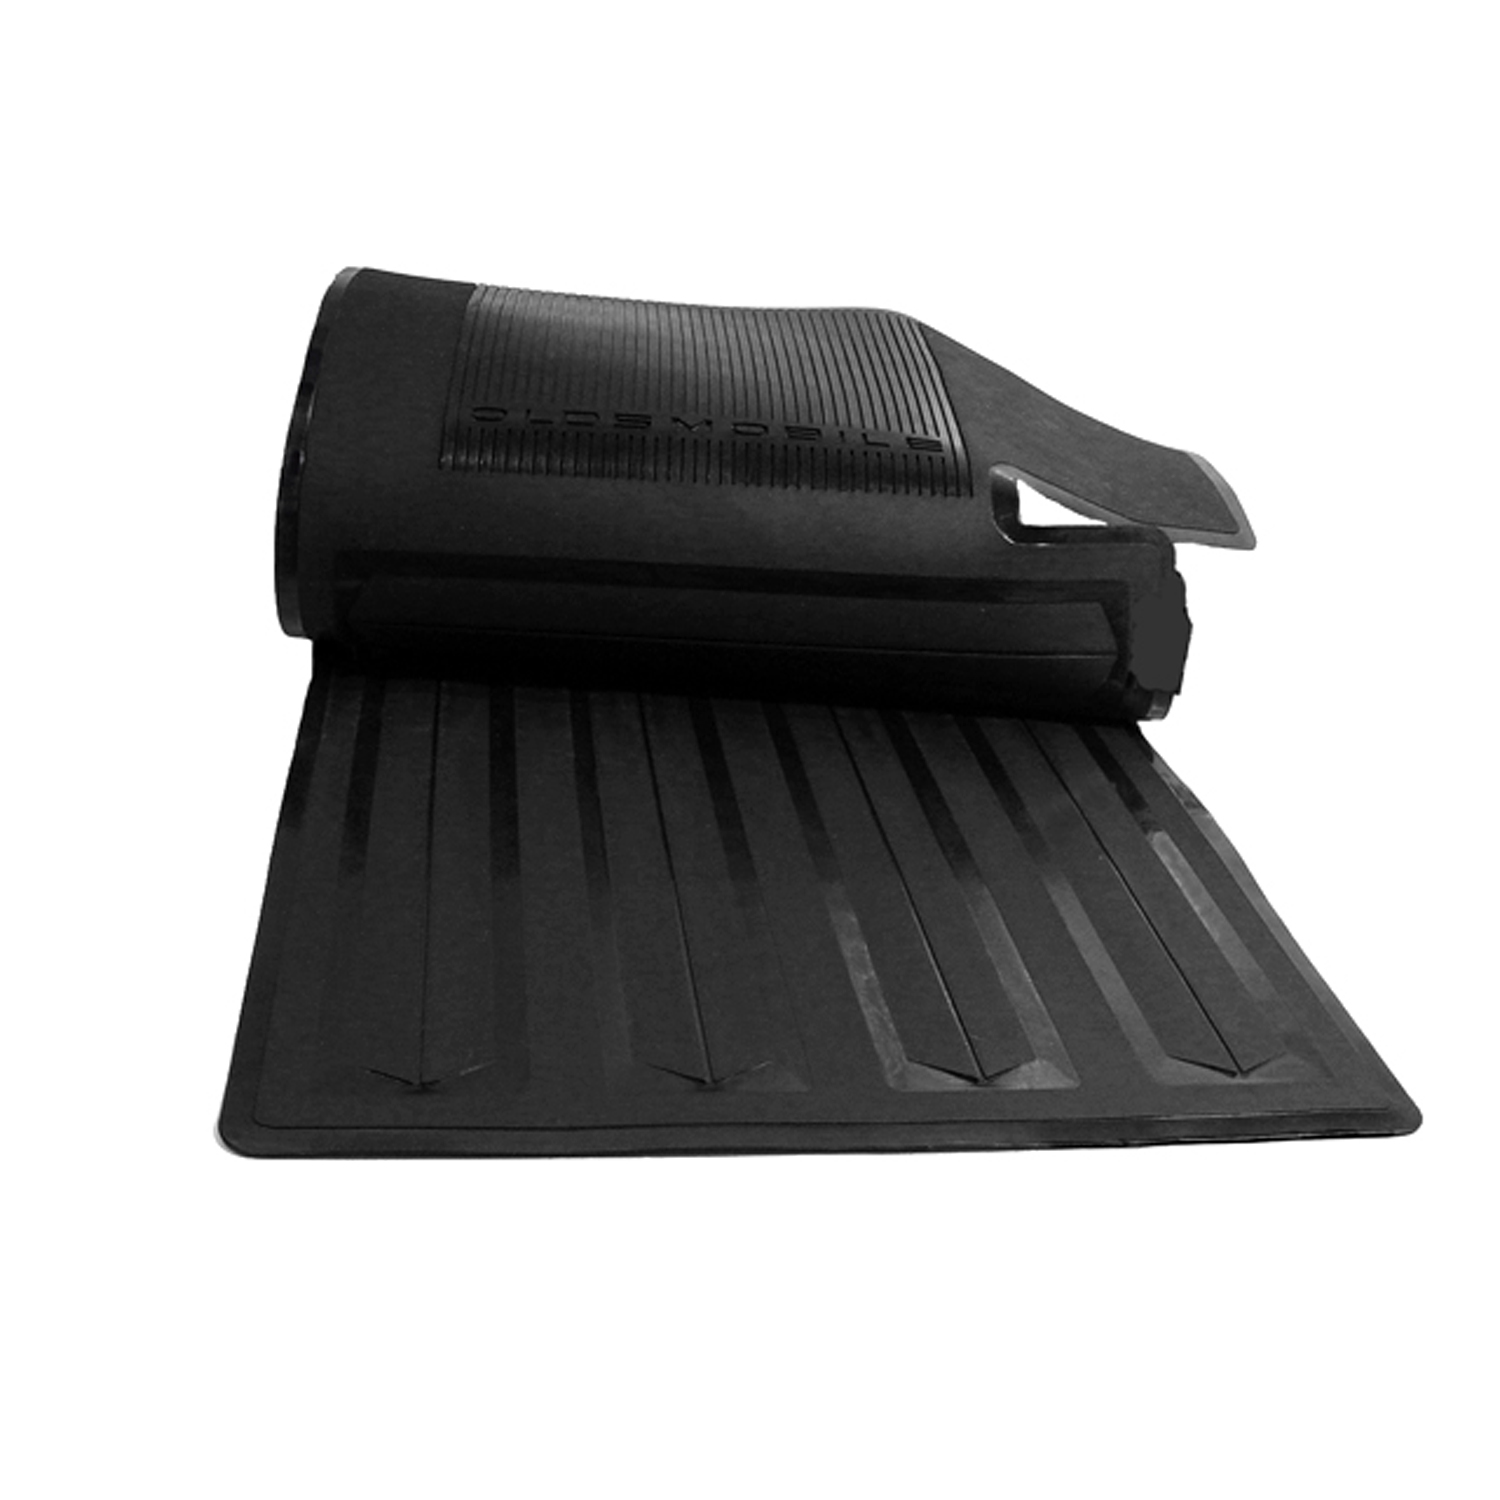 1966 Oldsmobile Dynamic 88 Floor Mats, front and rear.  Nice reproduction.  Black only-FM 7300